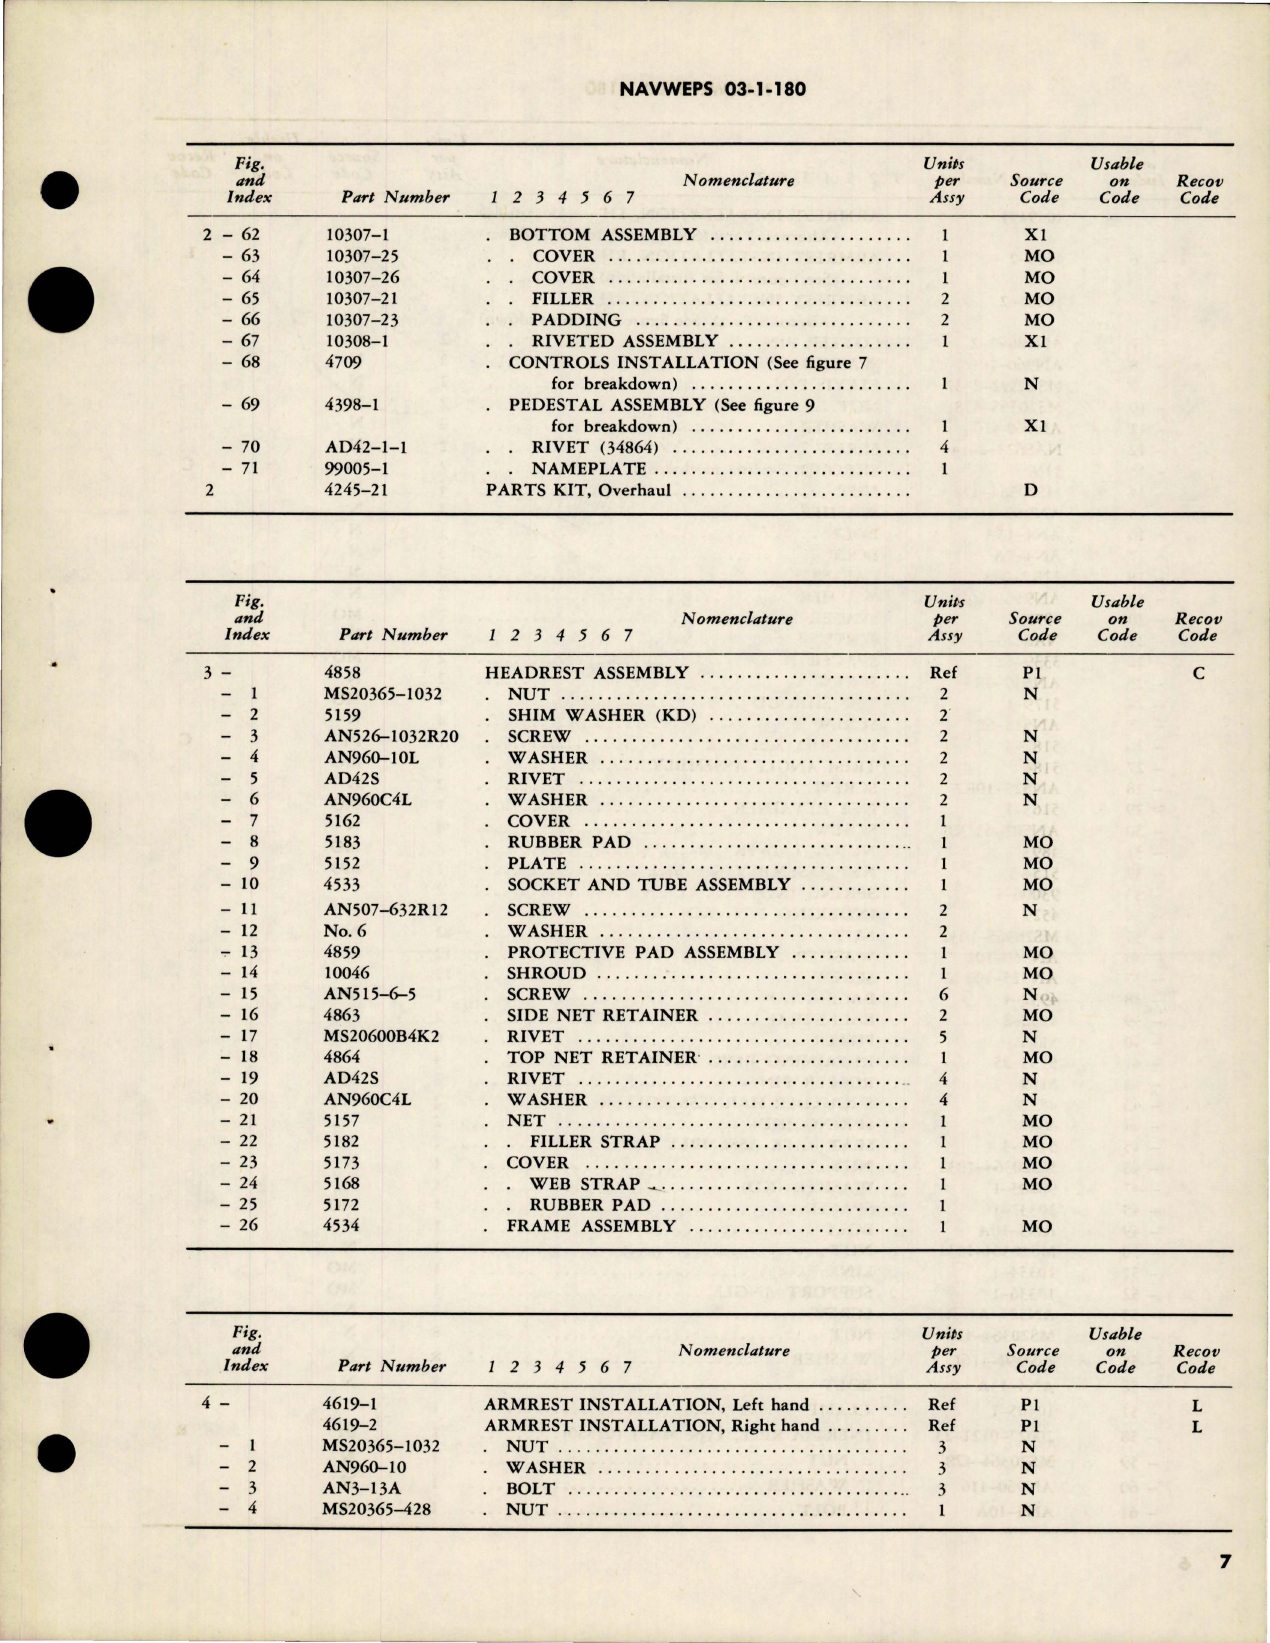 Sample page 9 from AirCorps Library document: Overhaul Instructions with Parts for Pilots, Copilots and Captains Seat Assemblies - Parts 4240-5 and 4245-5 